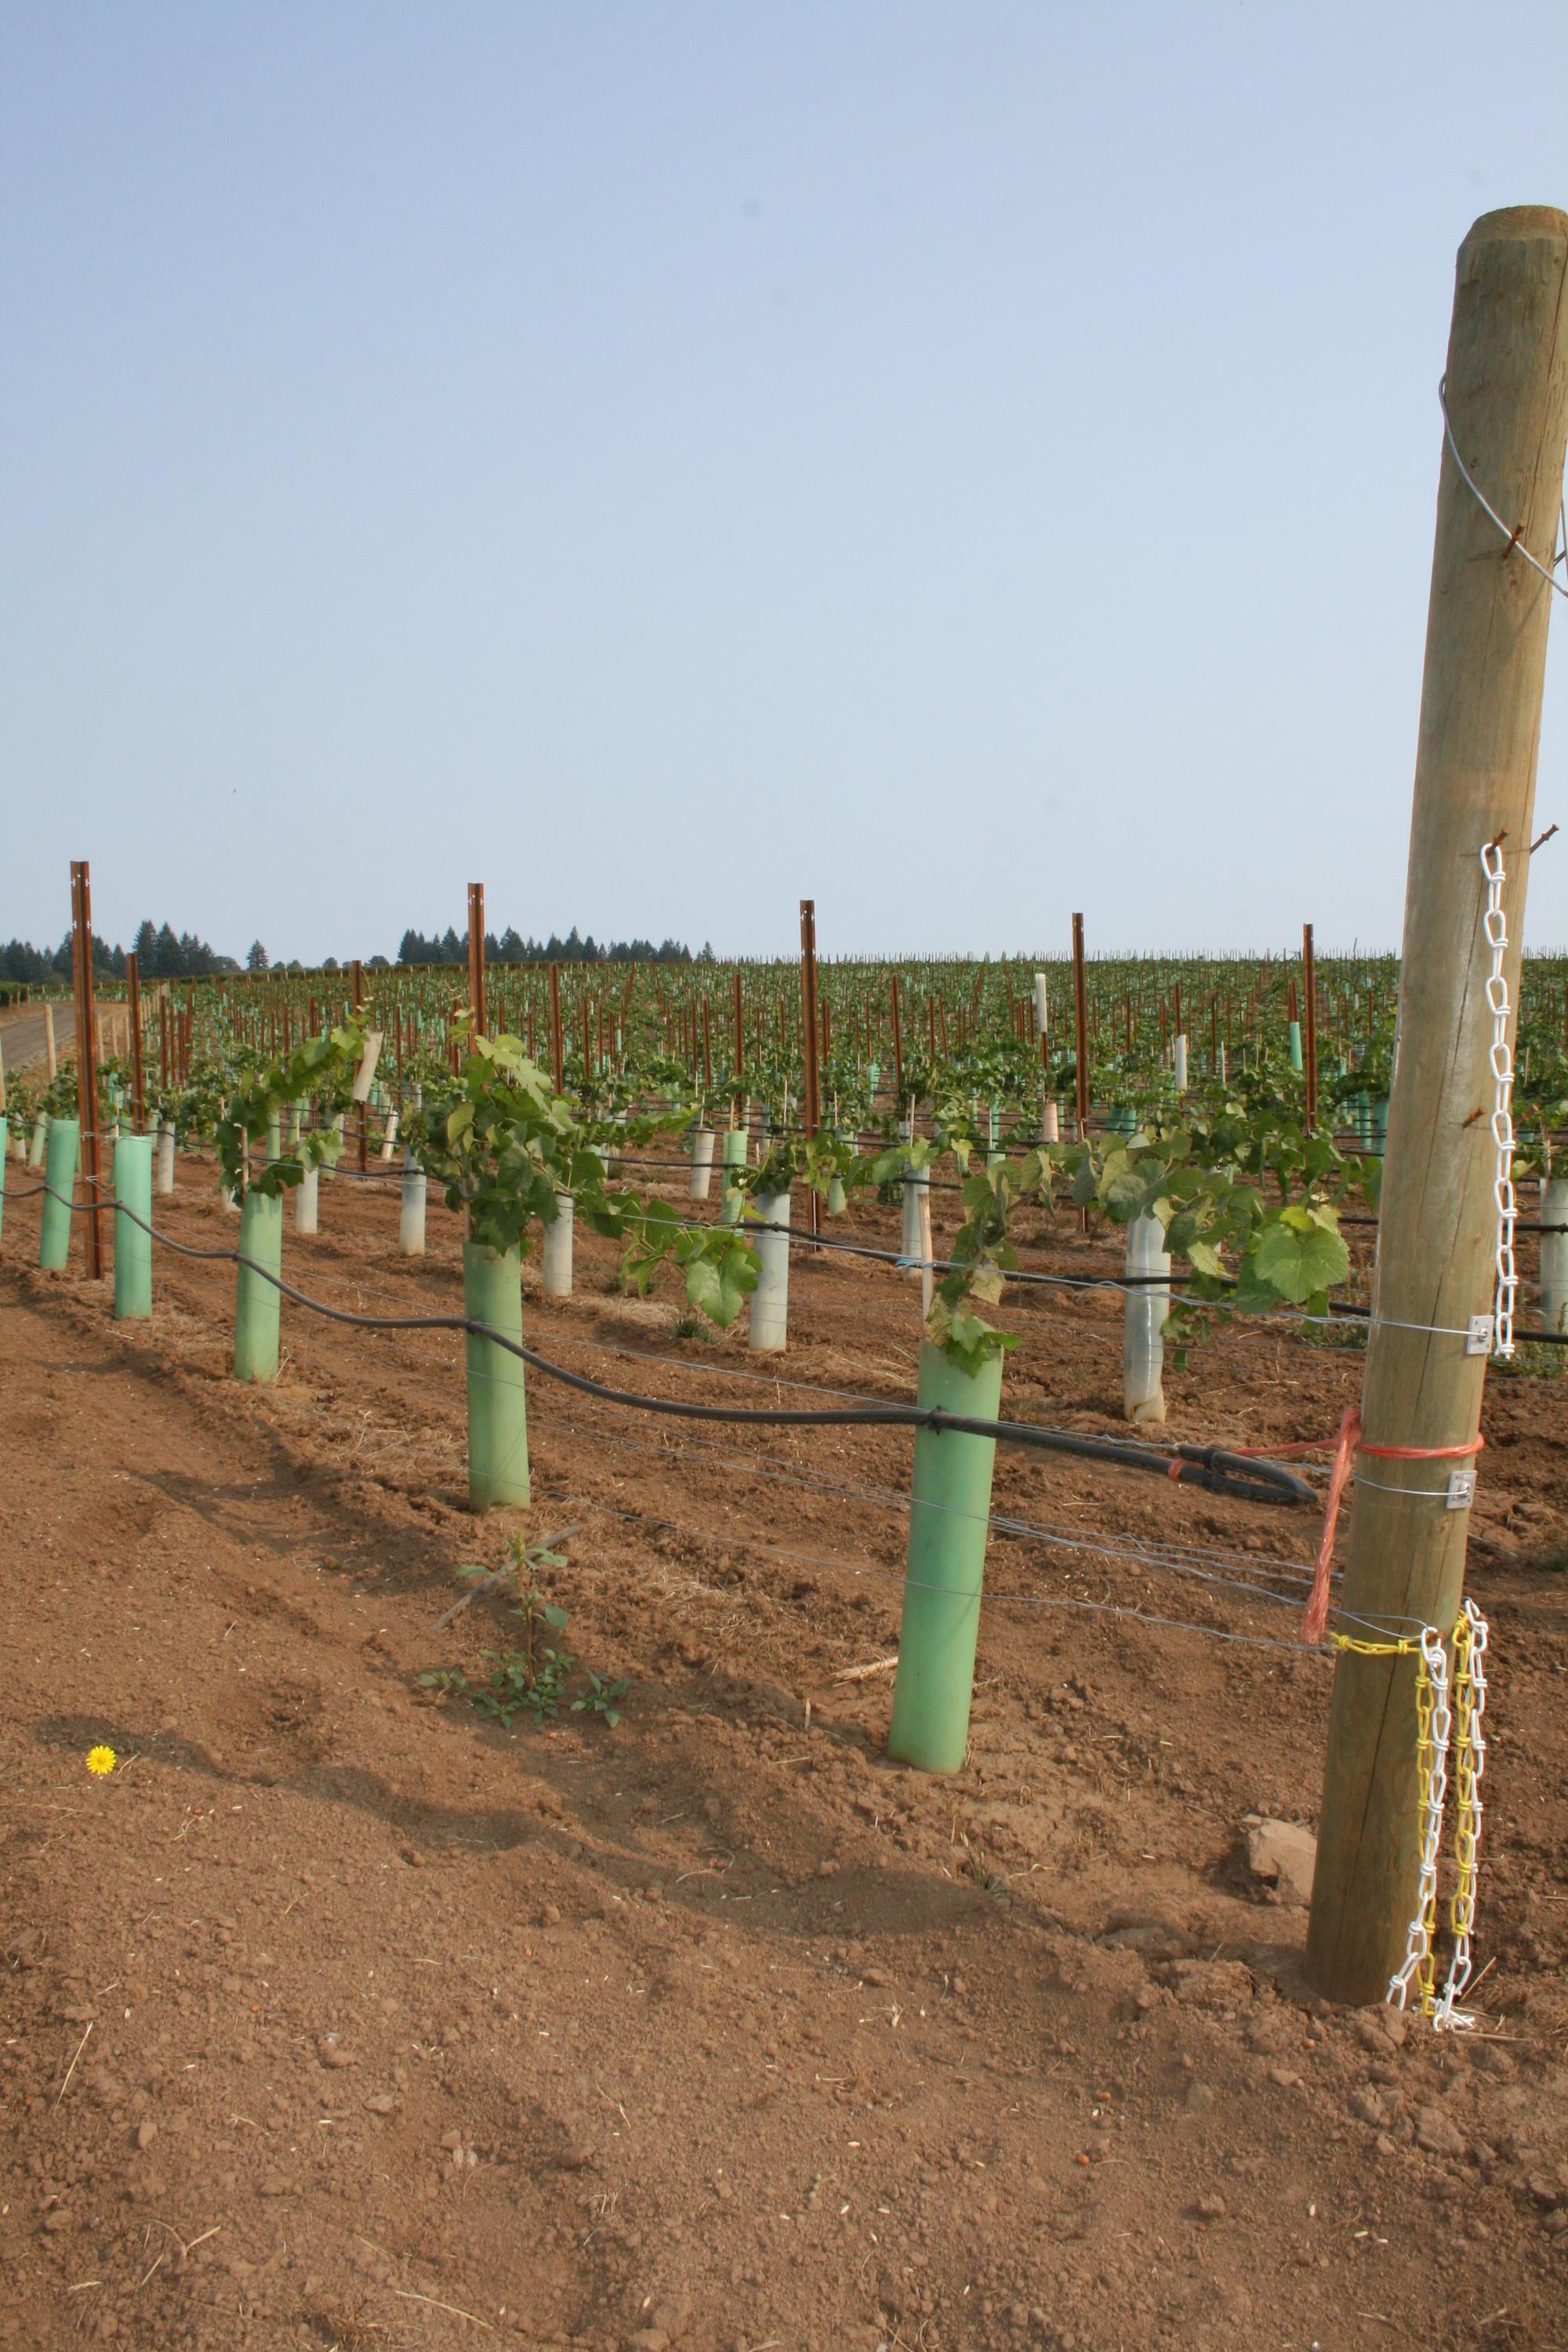 field of rows of small vines